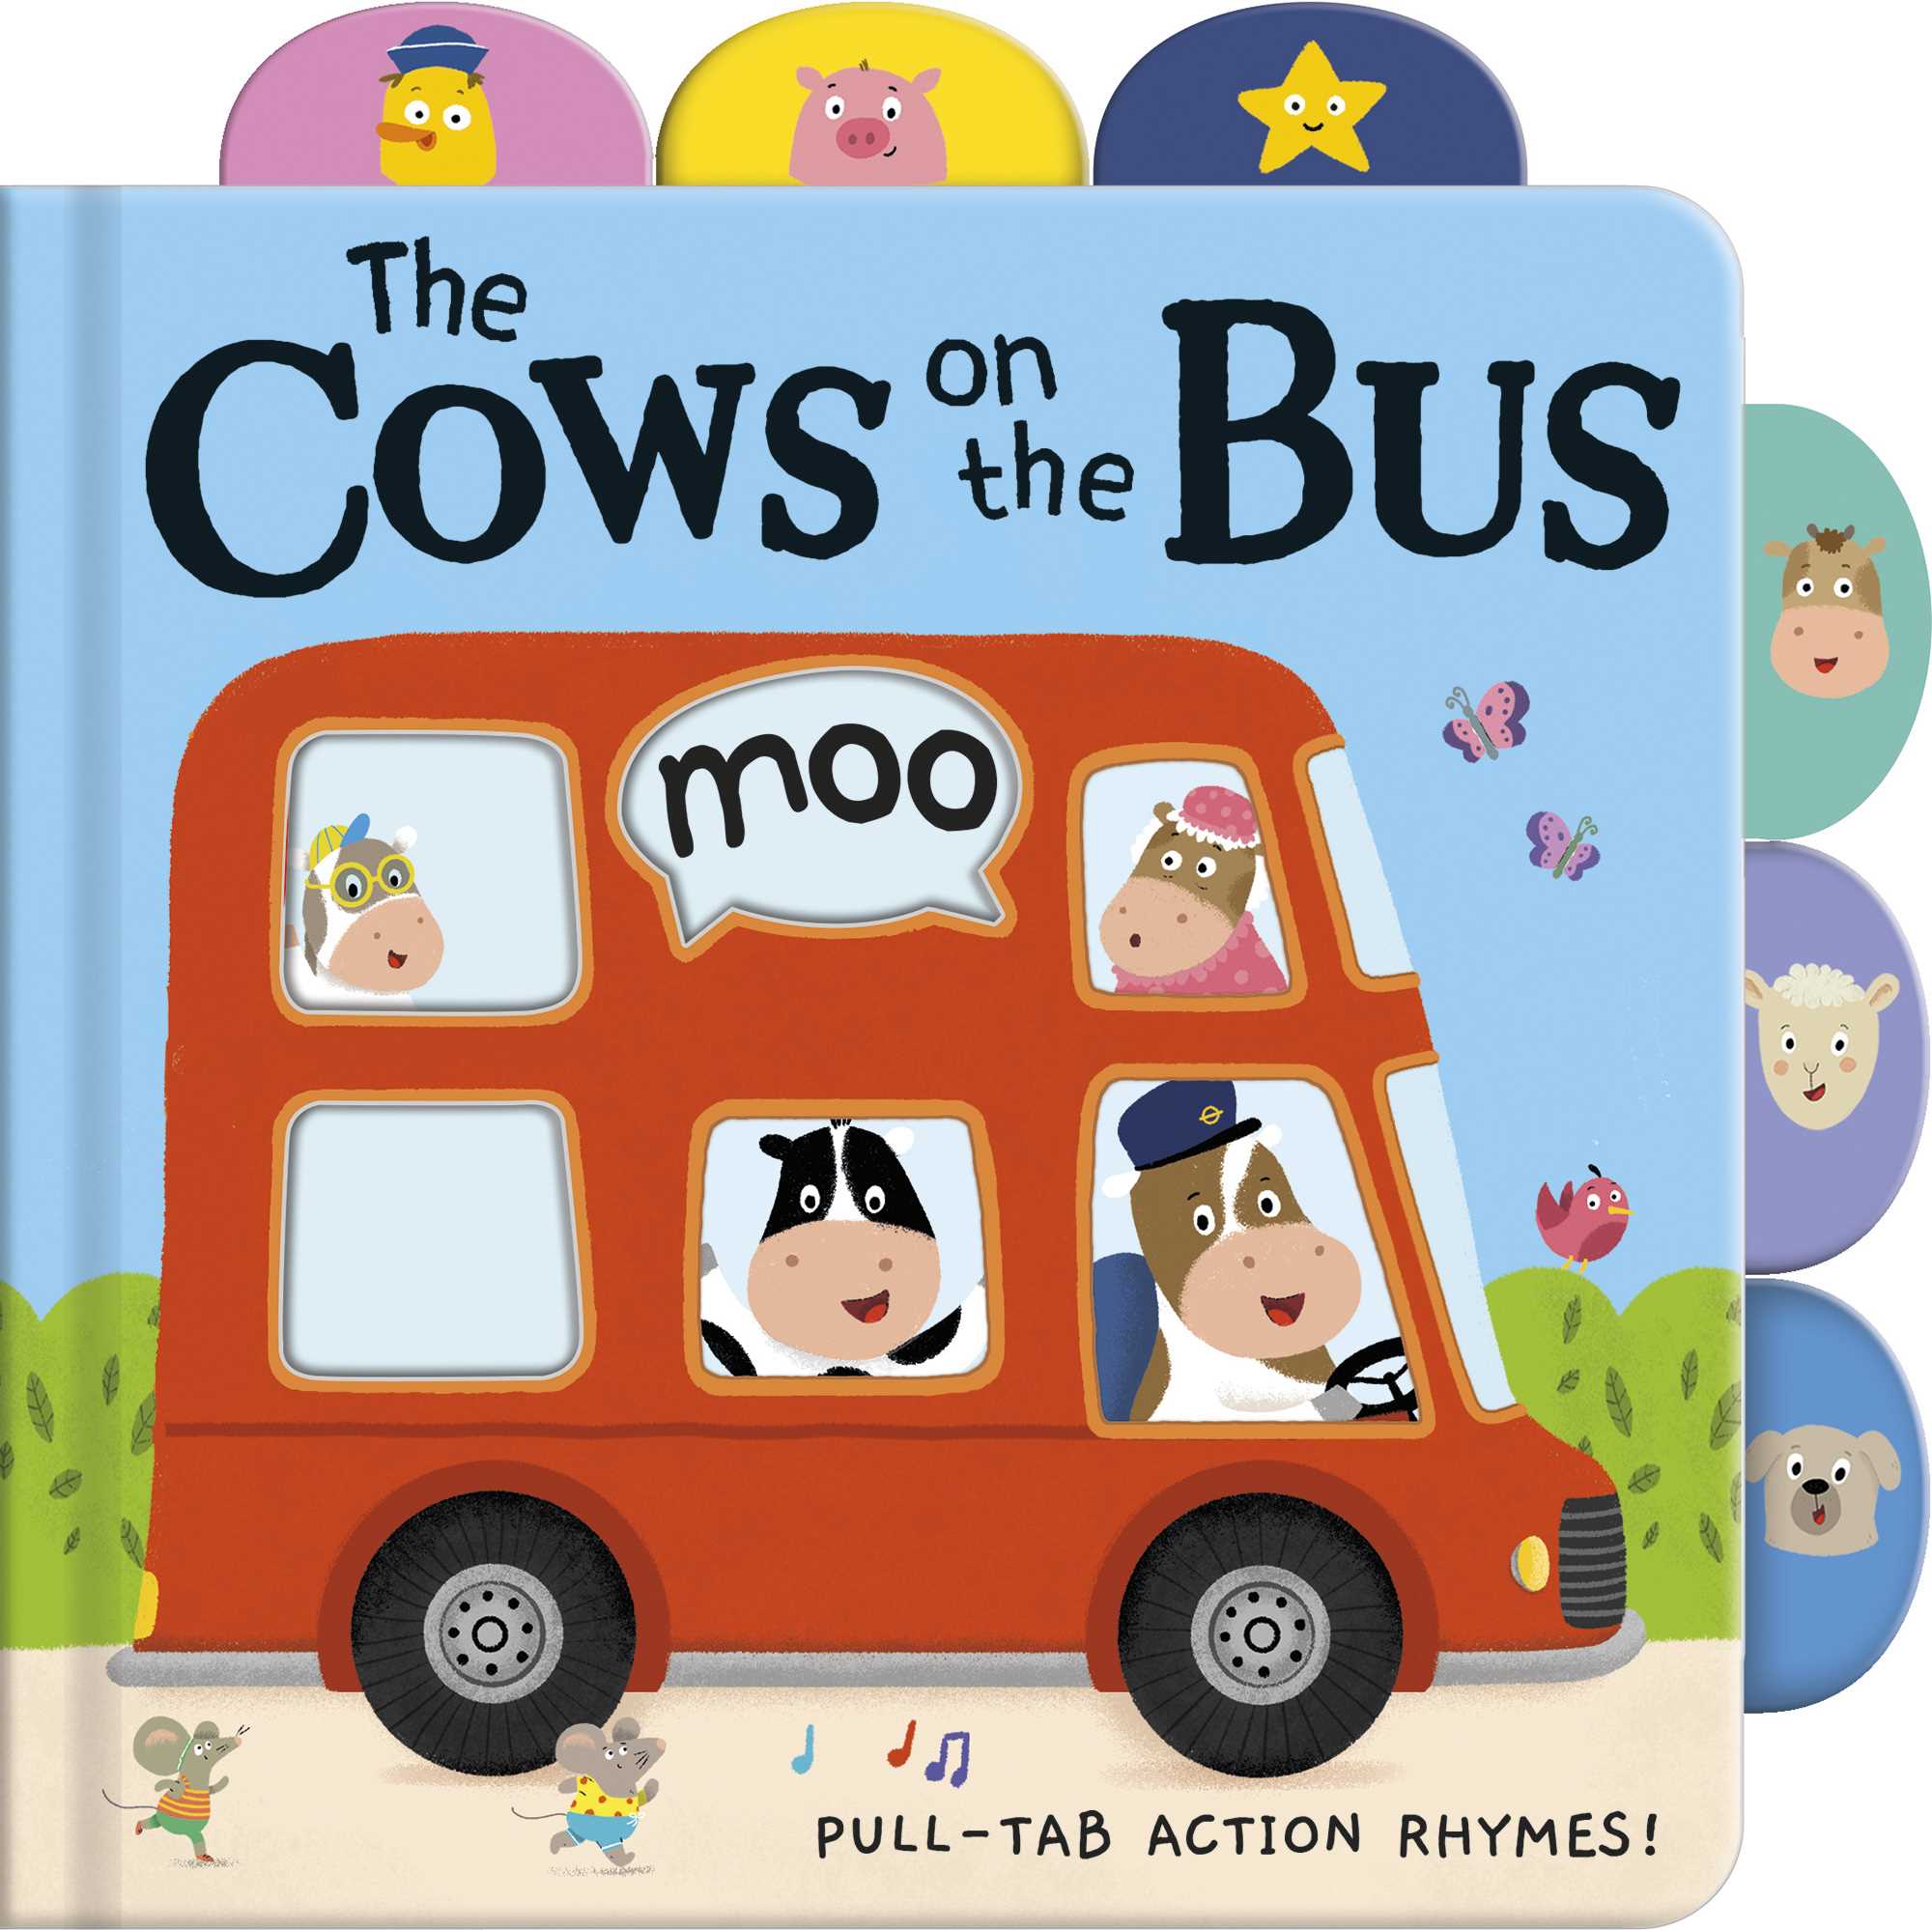 The Cows on the Bus